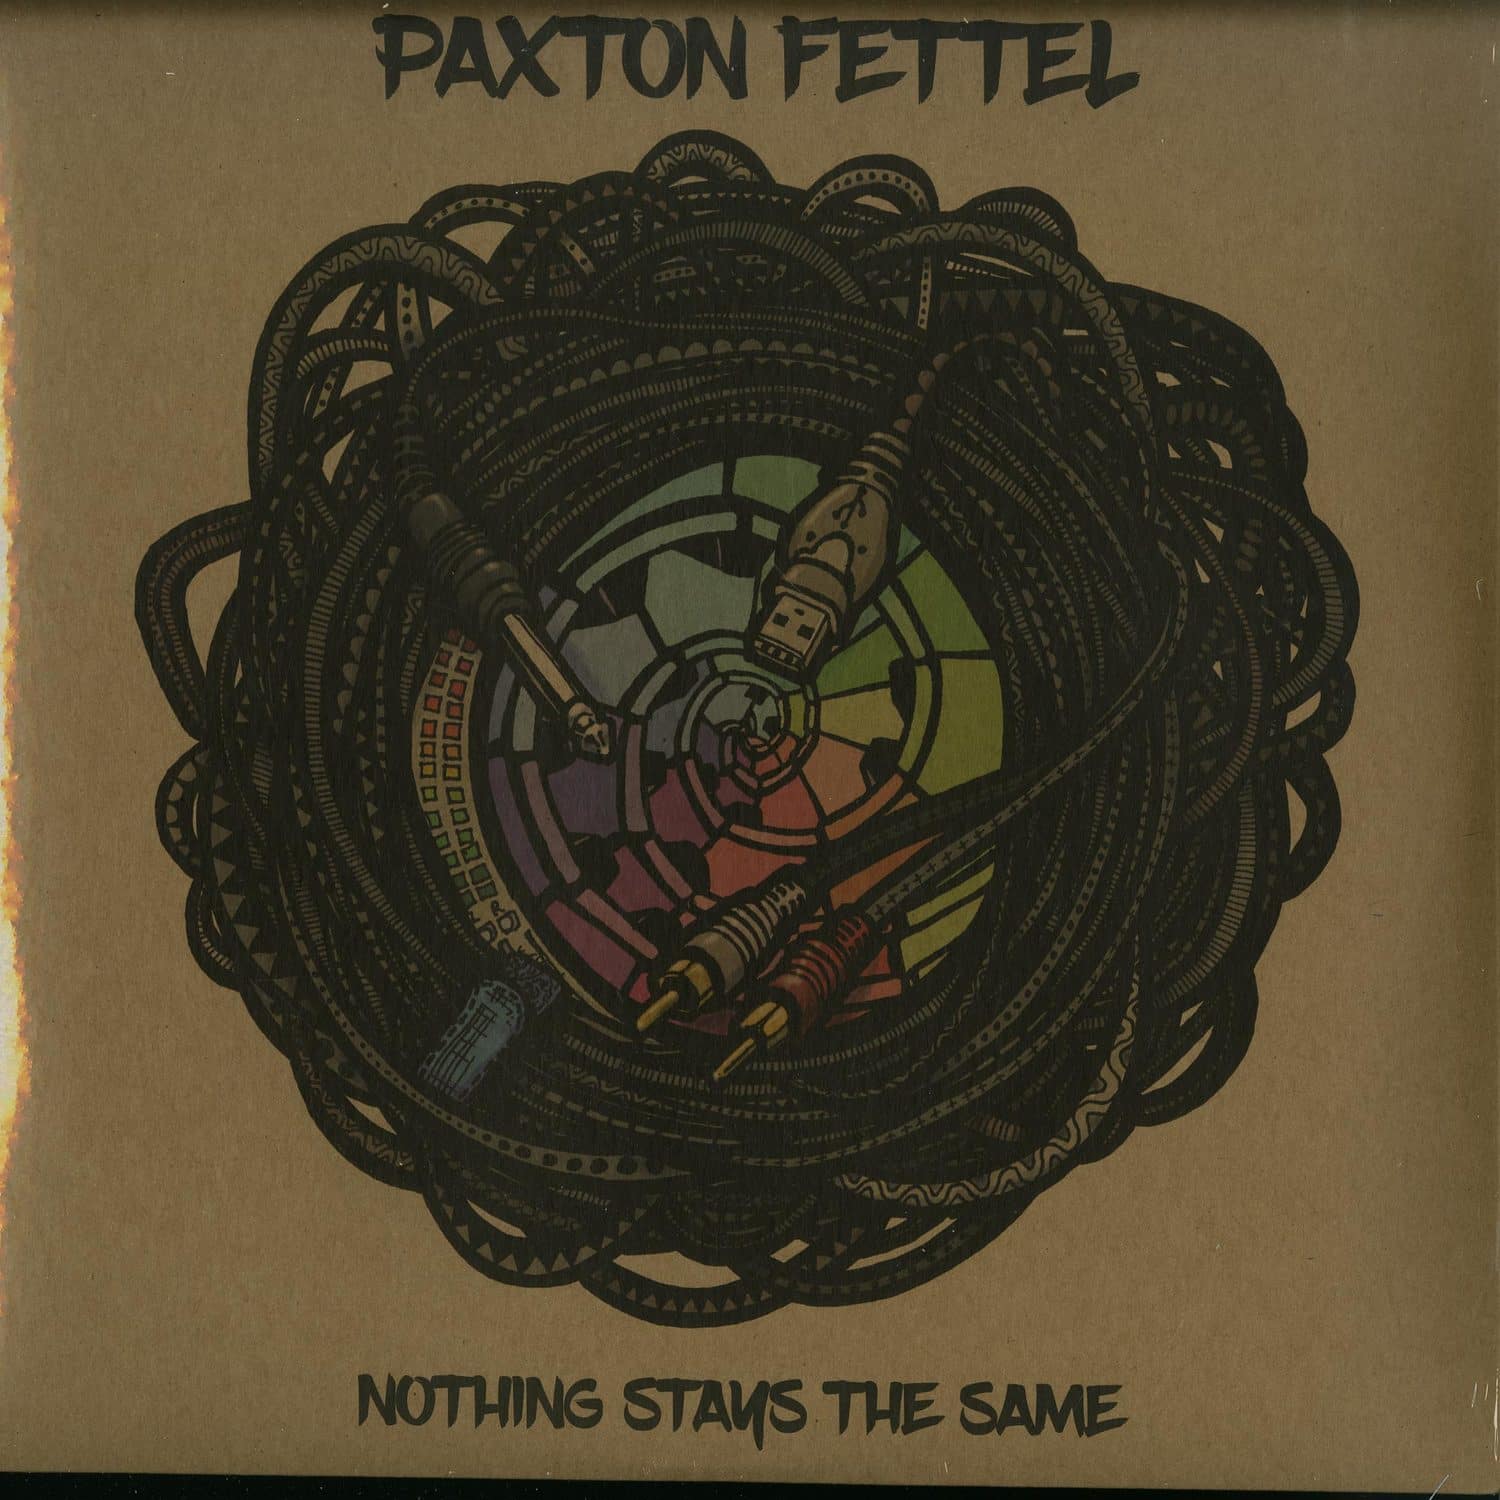 Paxton Fettel - NOTHING STAYS THE SAME 